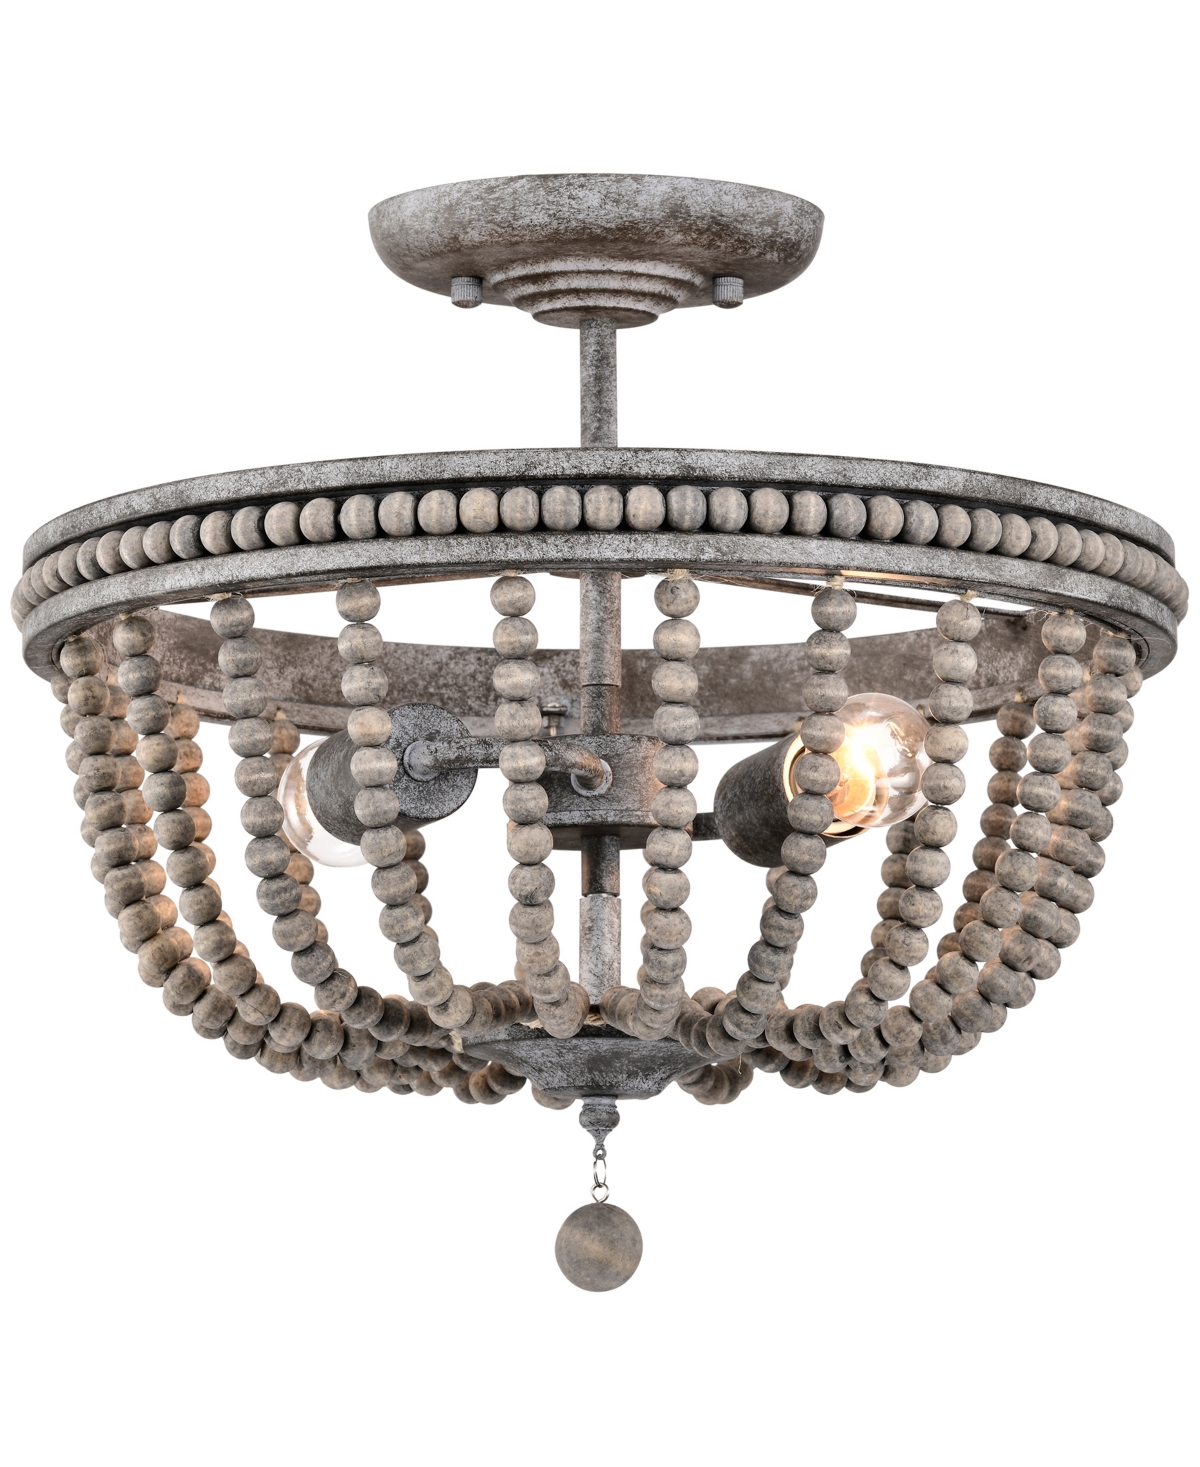 Home Accessories Pocany 16" 2-light Indoor Finish Semi-flush Mount Ceiling Light With Light Kit In Weathered Gray